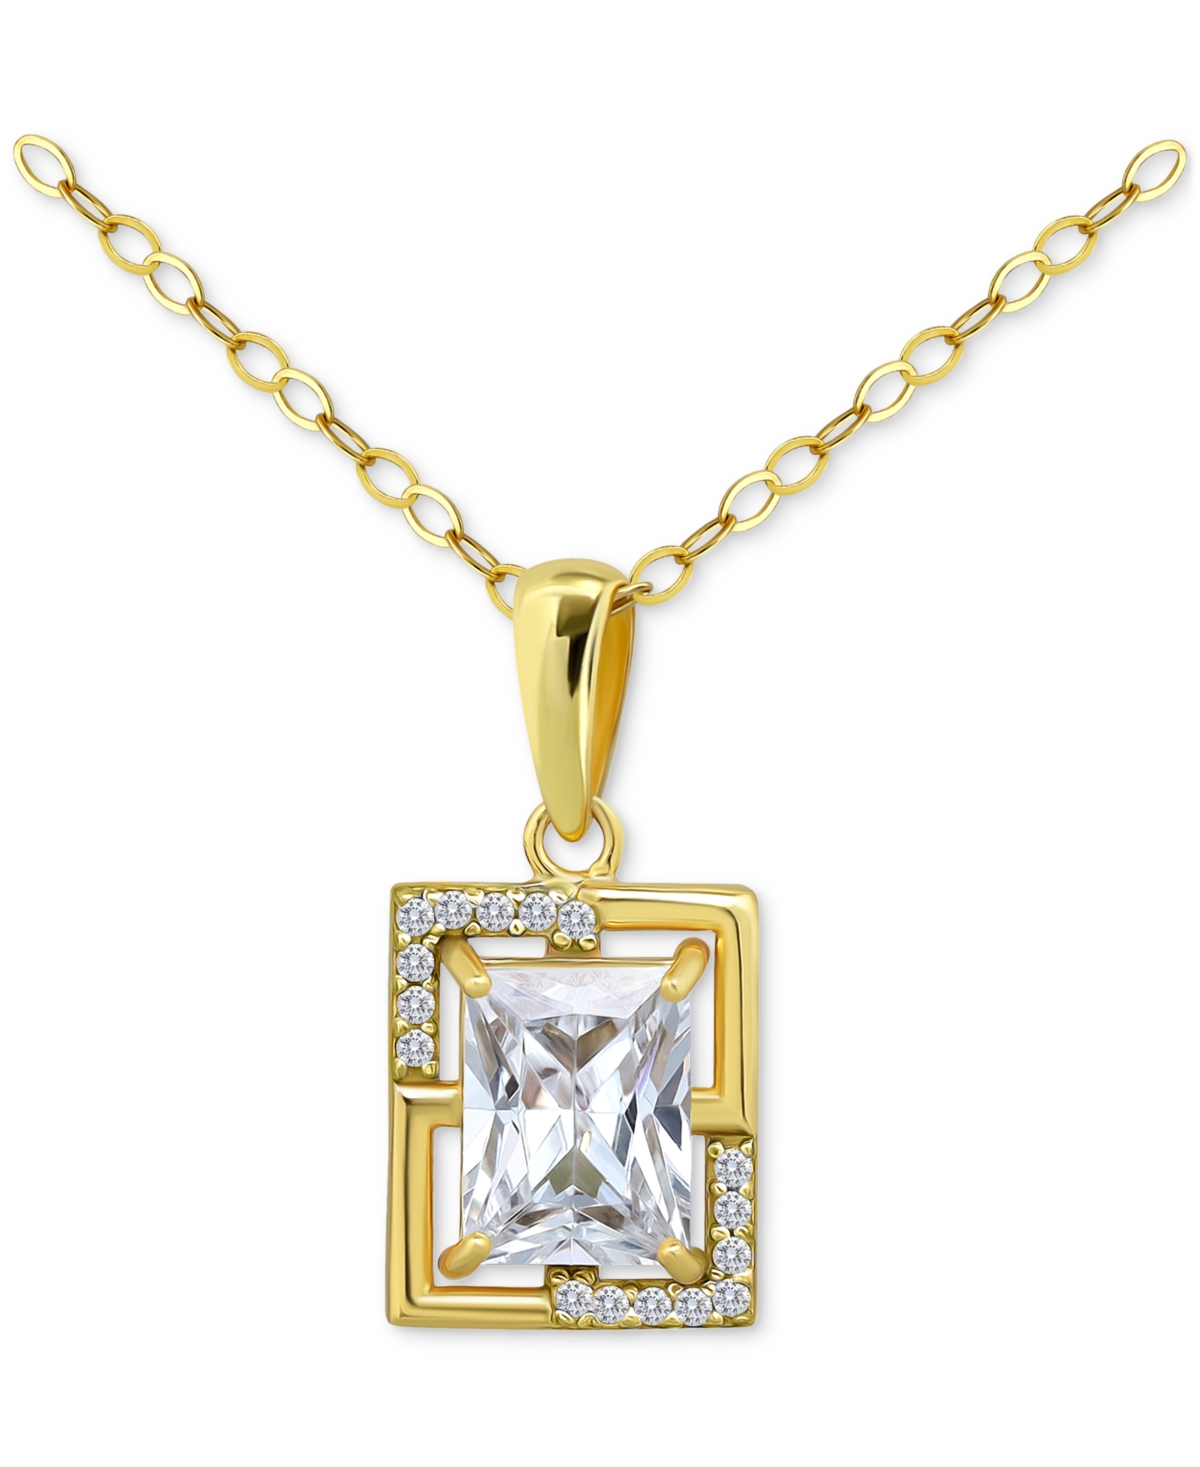 Giani Bernini Cubic Zirconia Baguette Framed Pendant Necklace In 18k Gold-plated Sterling Silver, 16" + 2" Extende